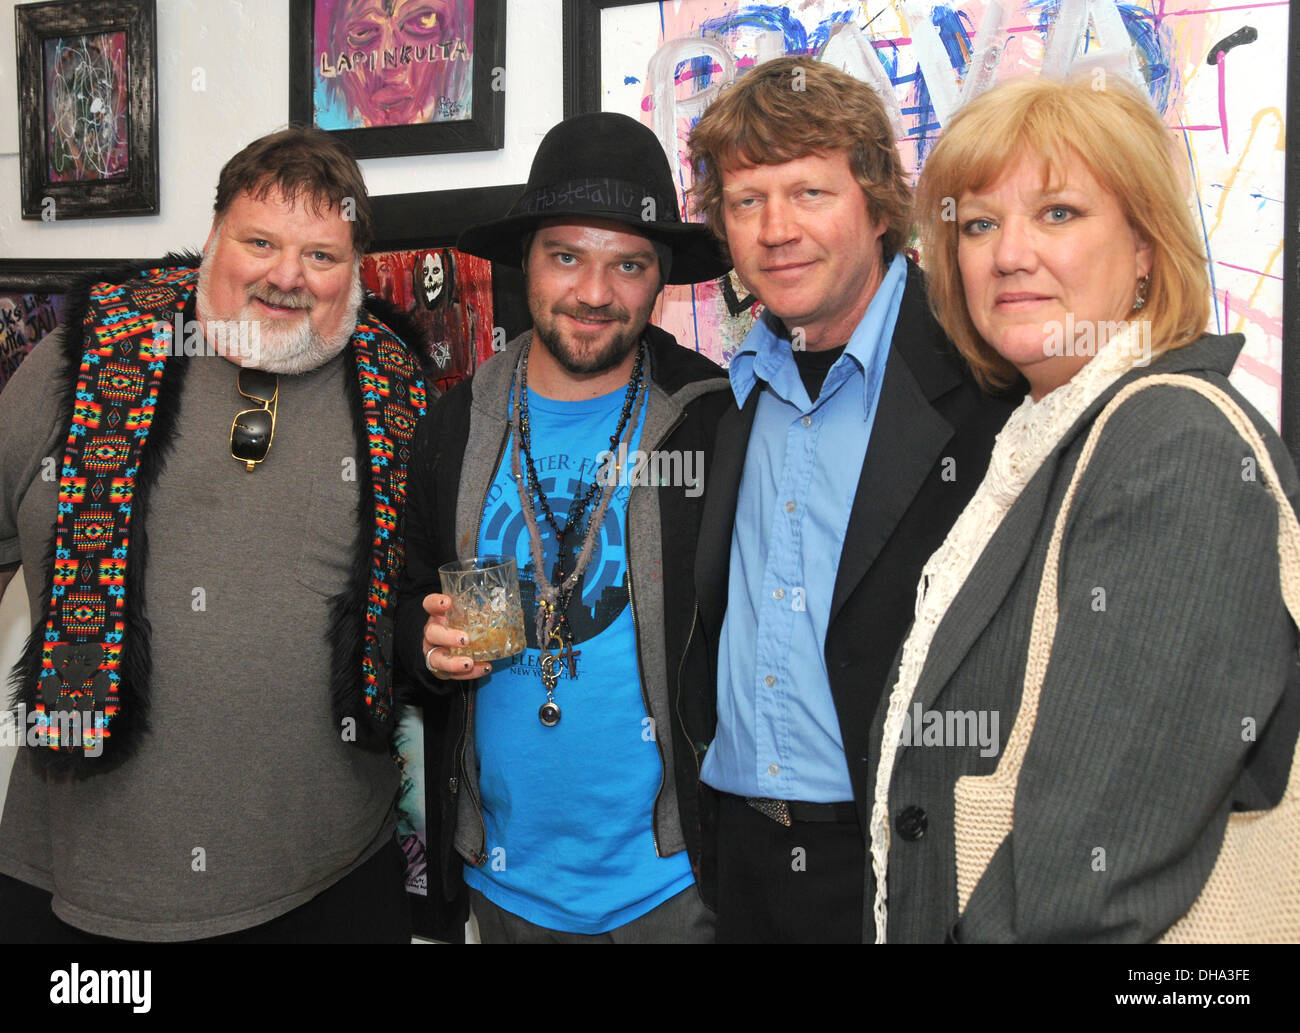 Phil Margera Bam Margera James Oliver and April Margera Bam Margera & Friends art exhibition opening at James Oliver Gallery Stock Photo